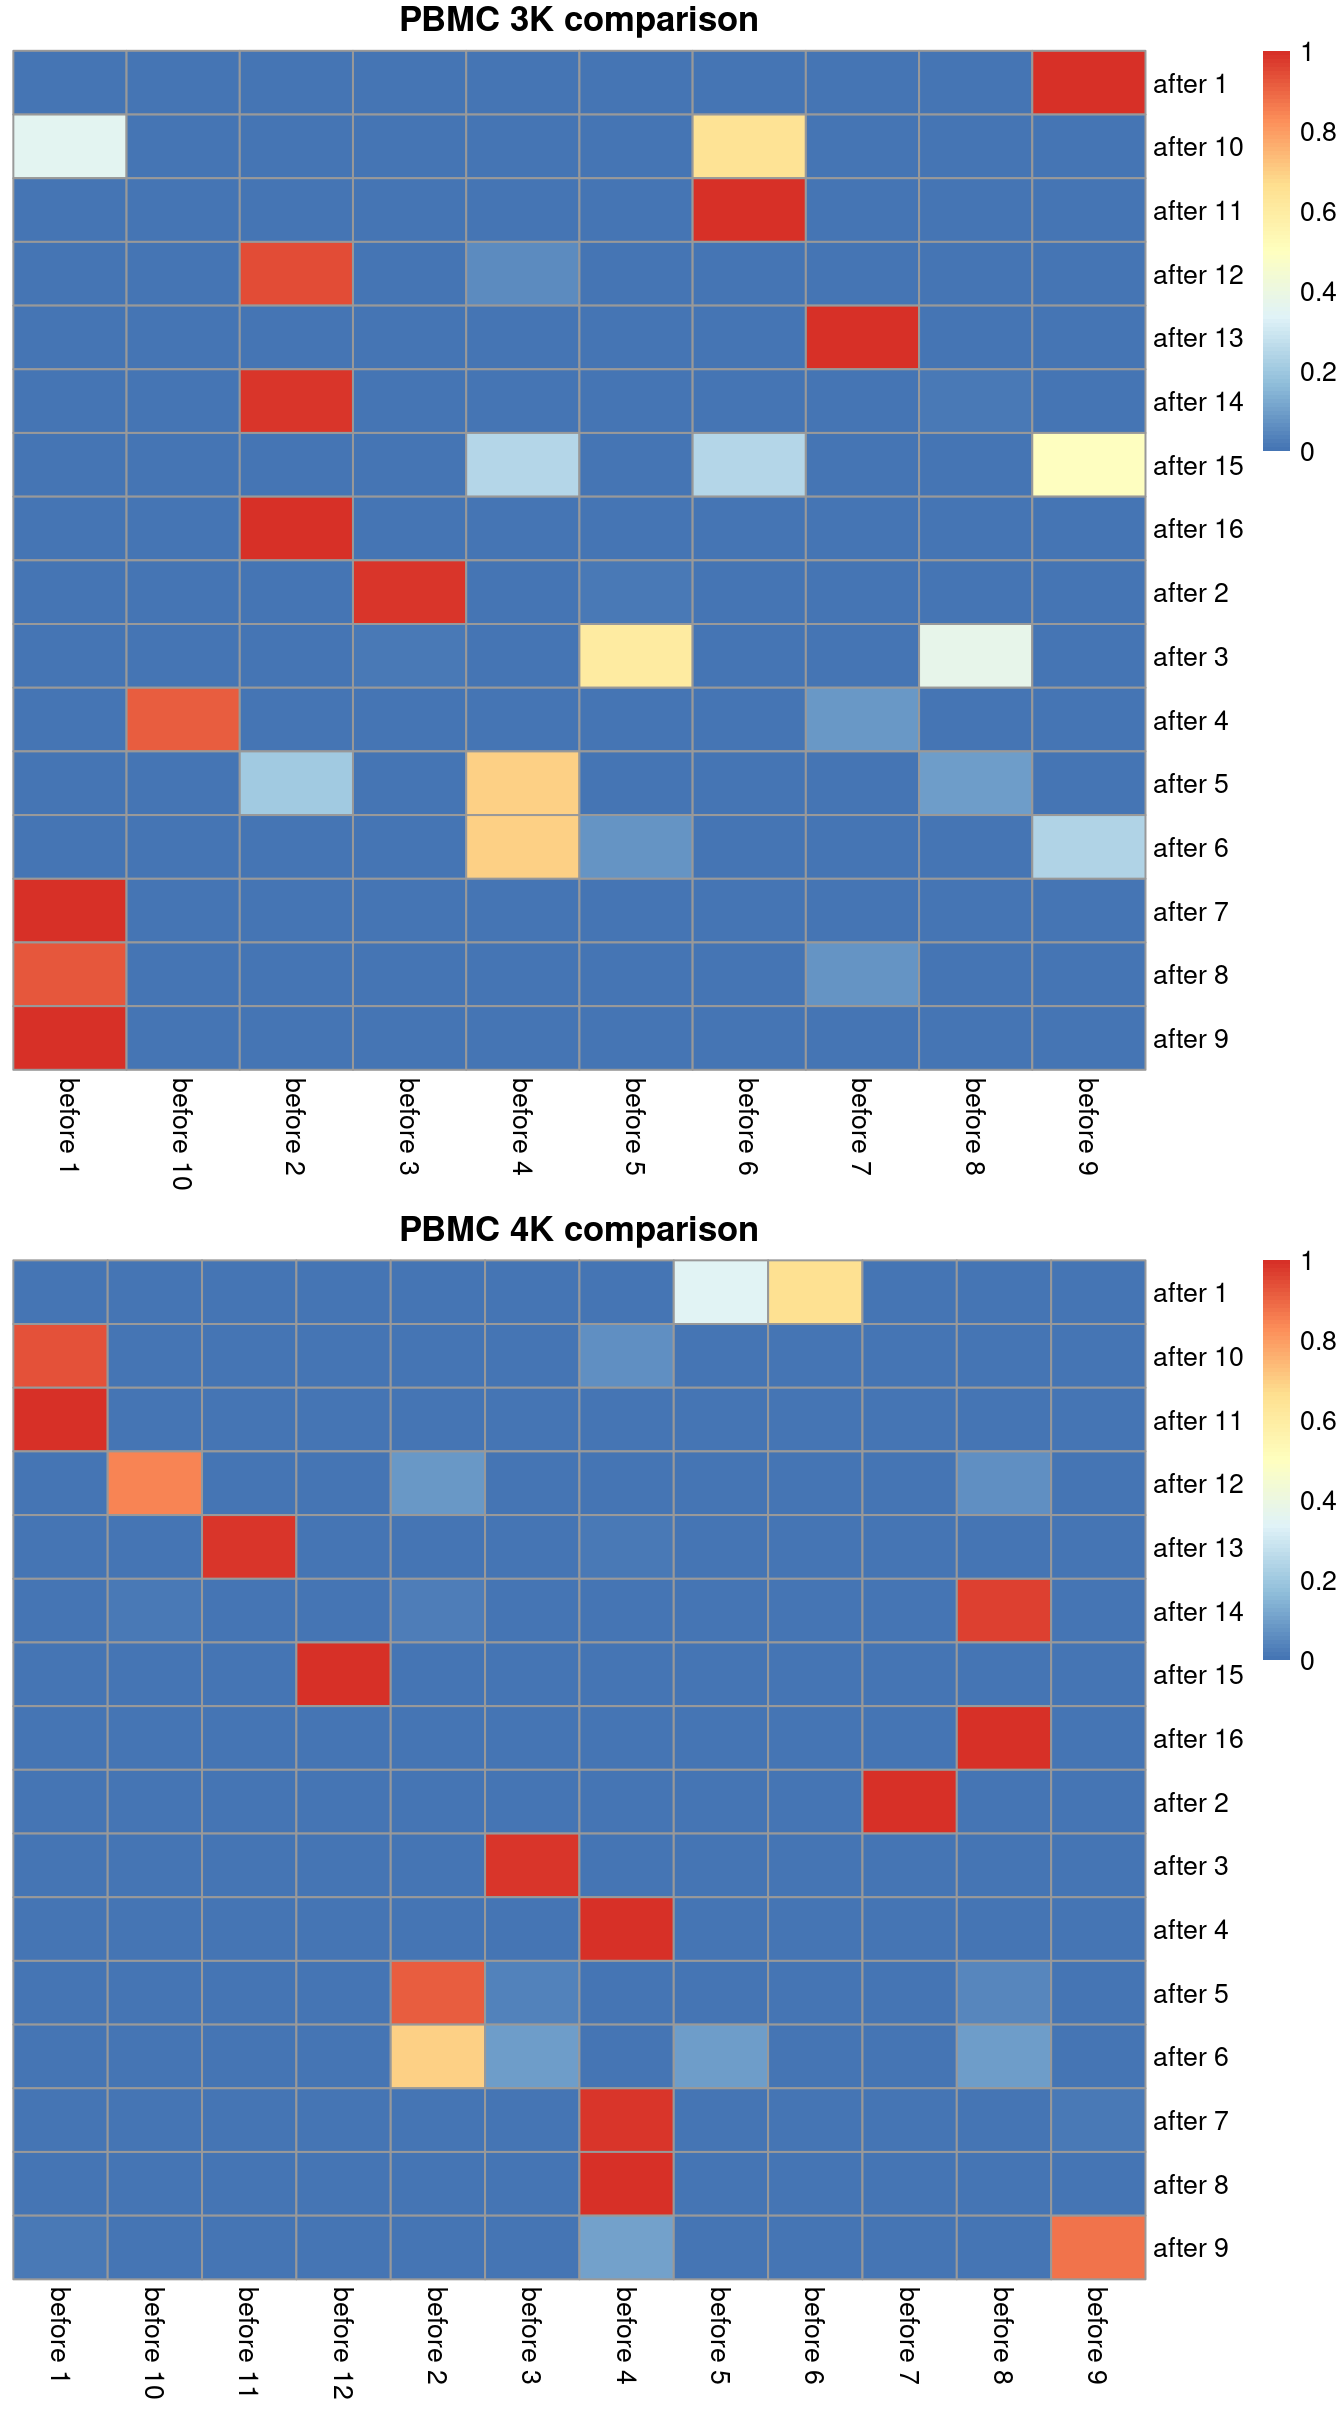 Comparison between the clusterings obtained before (columns) and after MNN correction (rows). One heatmap is generated for each of the PBMC 3K and 4K datasets, where each entry is colored according to the proportion of cells distributed along each row (i.e., the row sums equal unity).